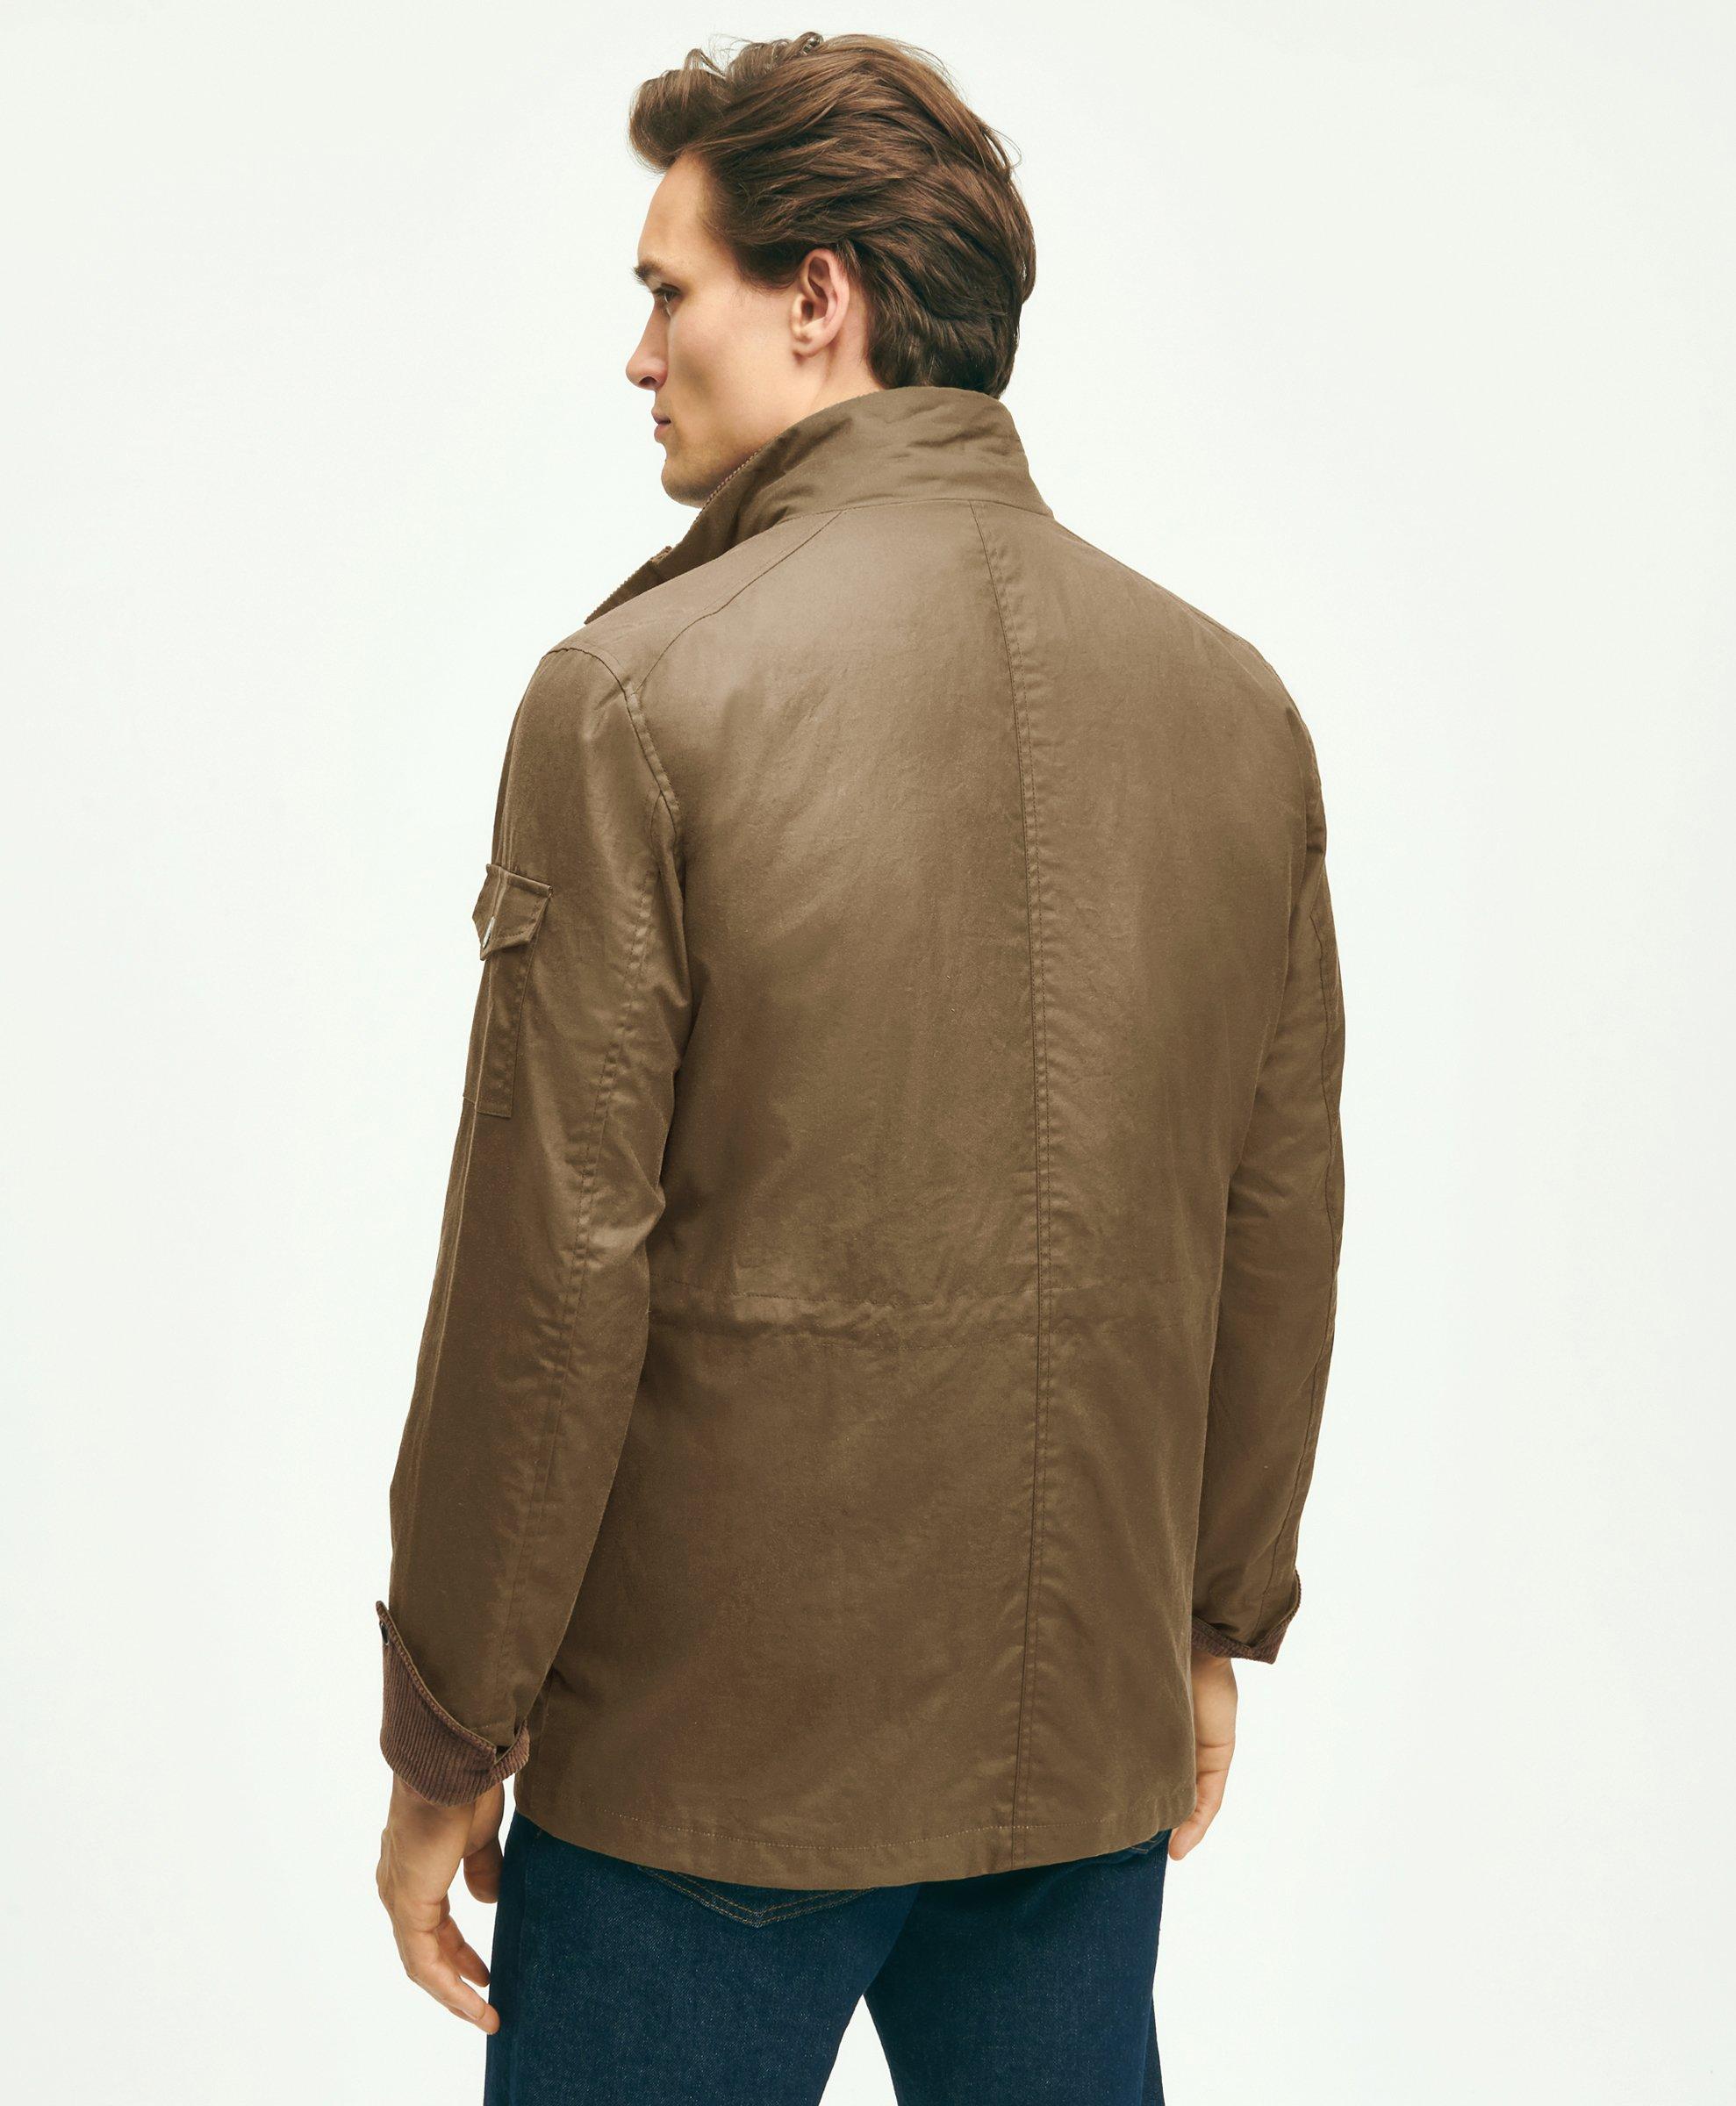 Cotton Waxed 3-In-1 Jacket